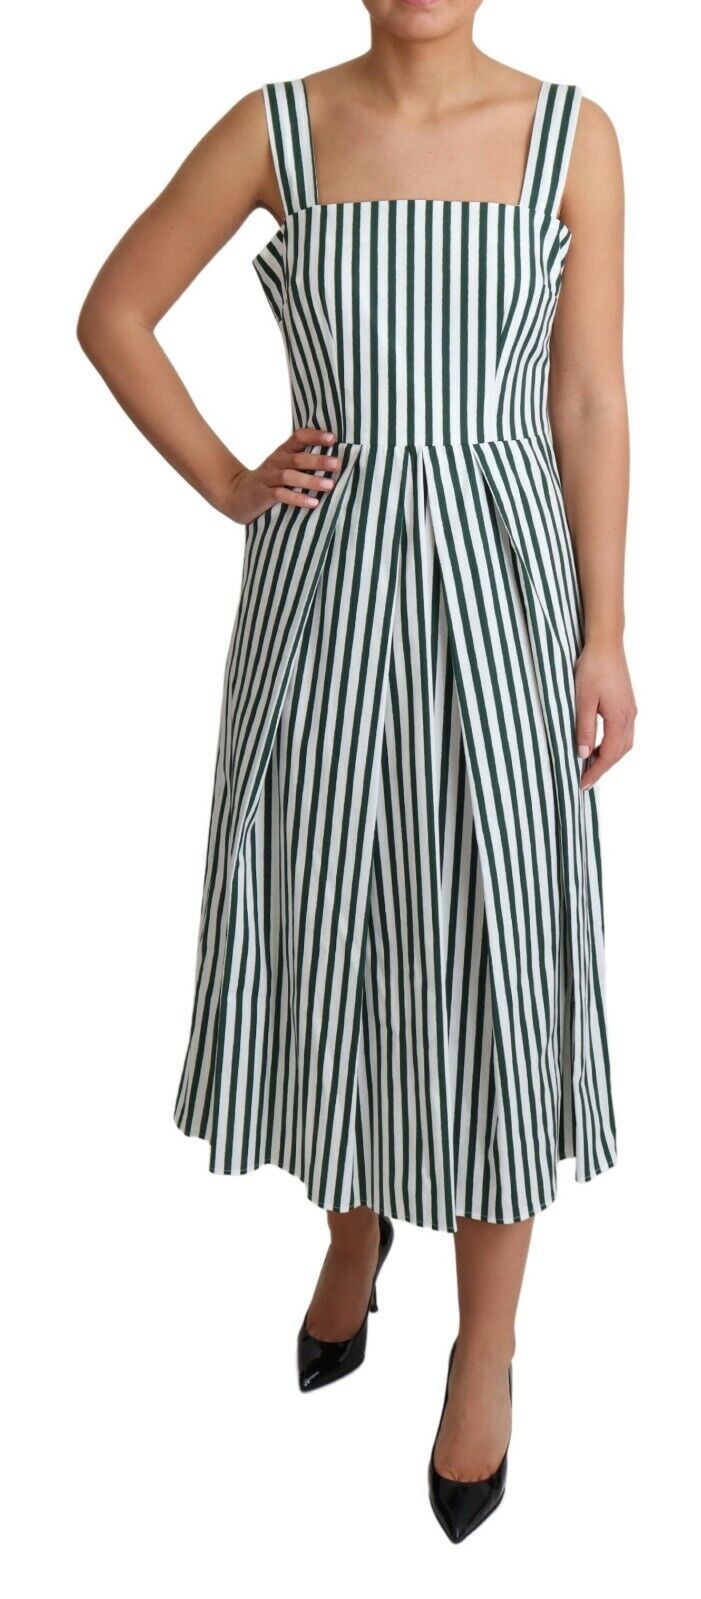 Chic Sleeveless A-Line Dress in White & Green